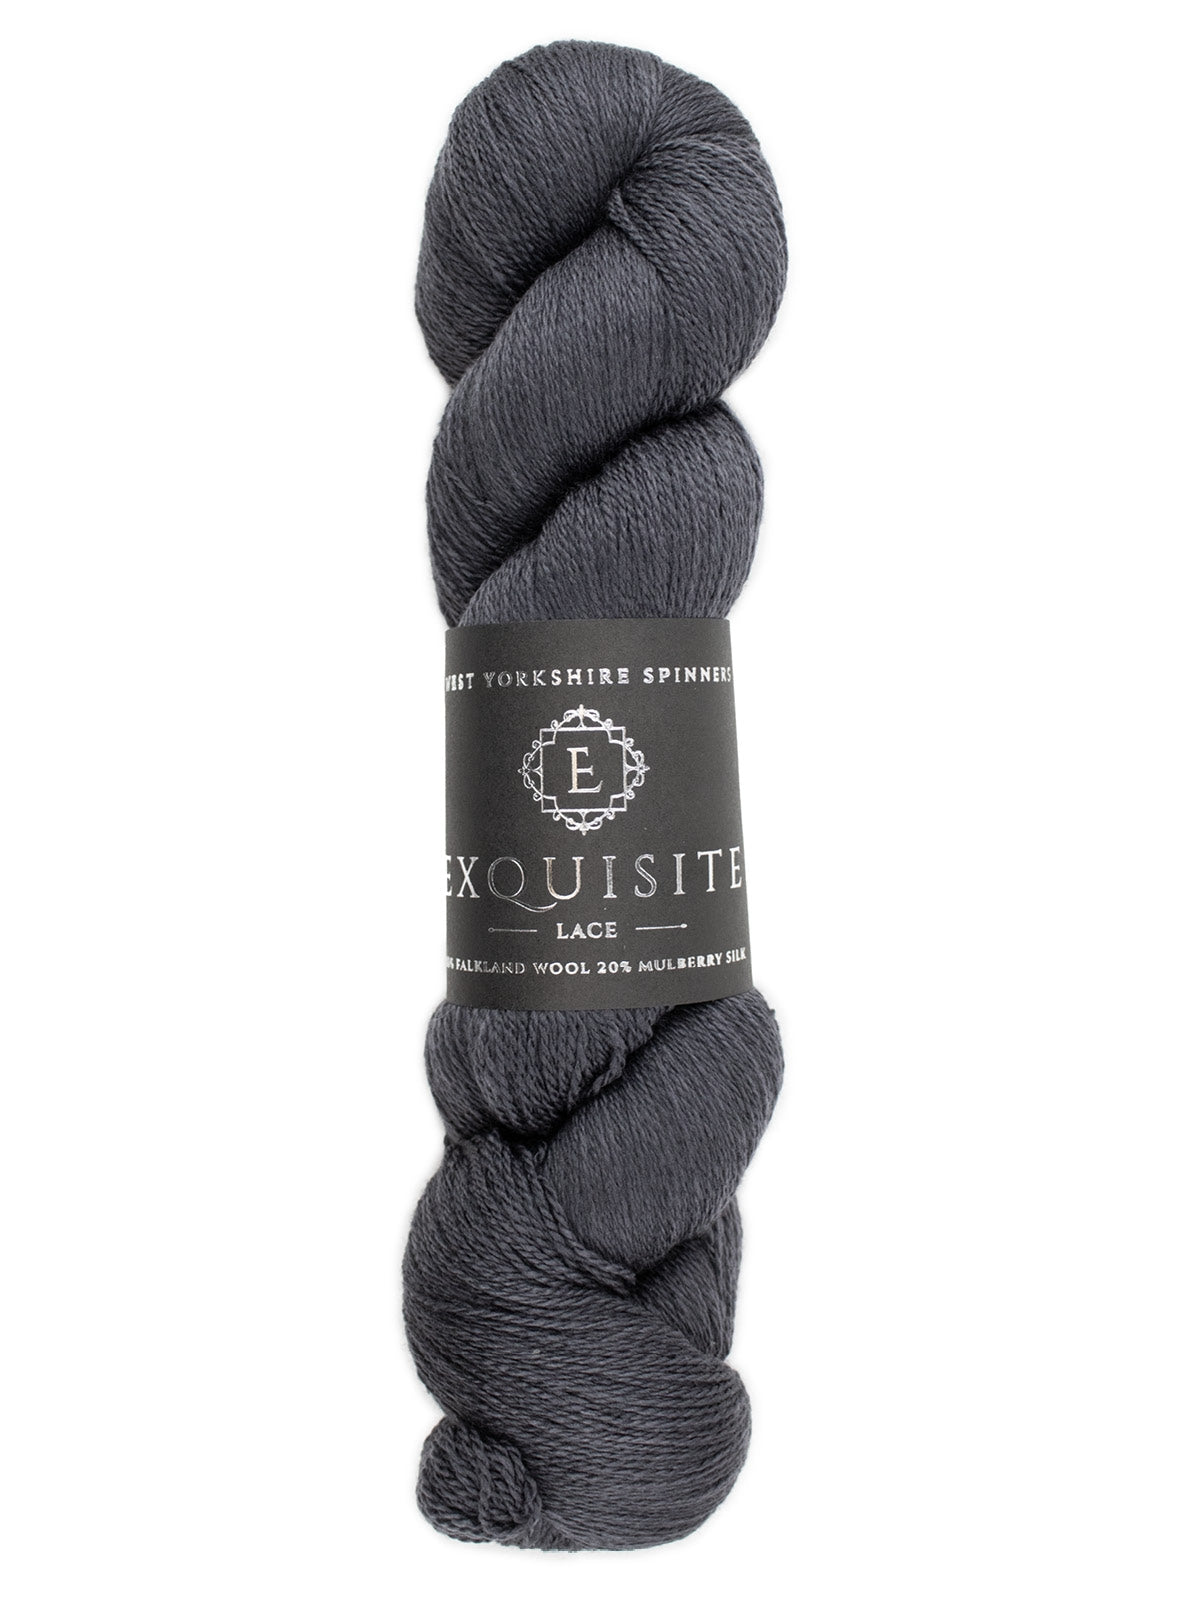 West Yorkshire Spinners Exquiste Lace yarn color dark gray